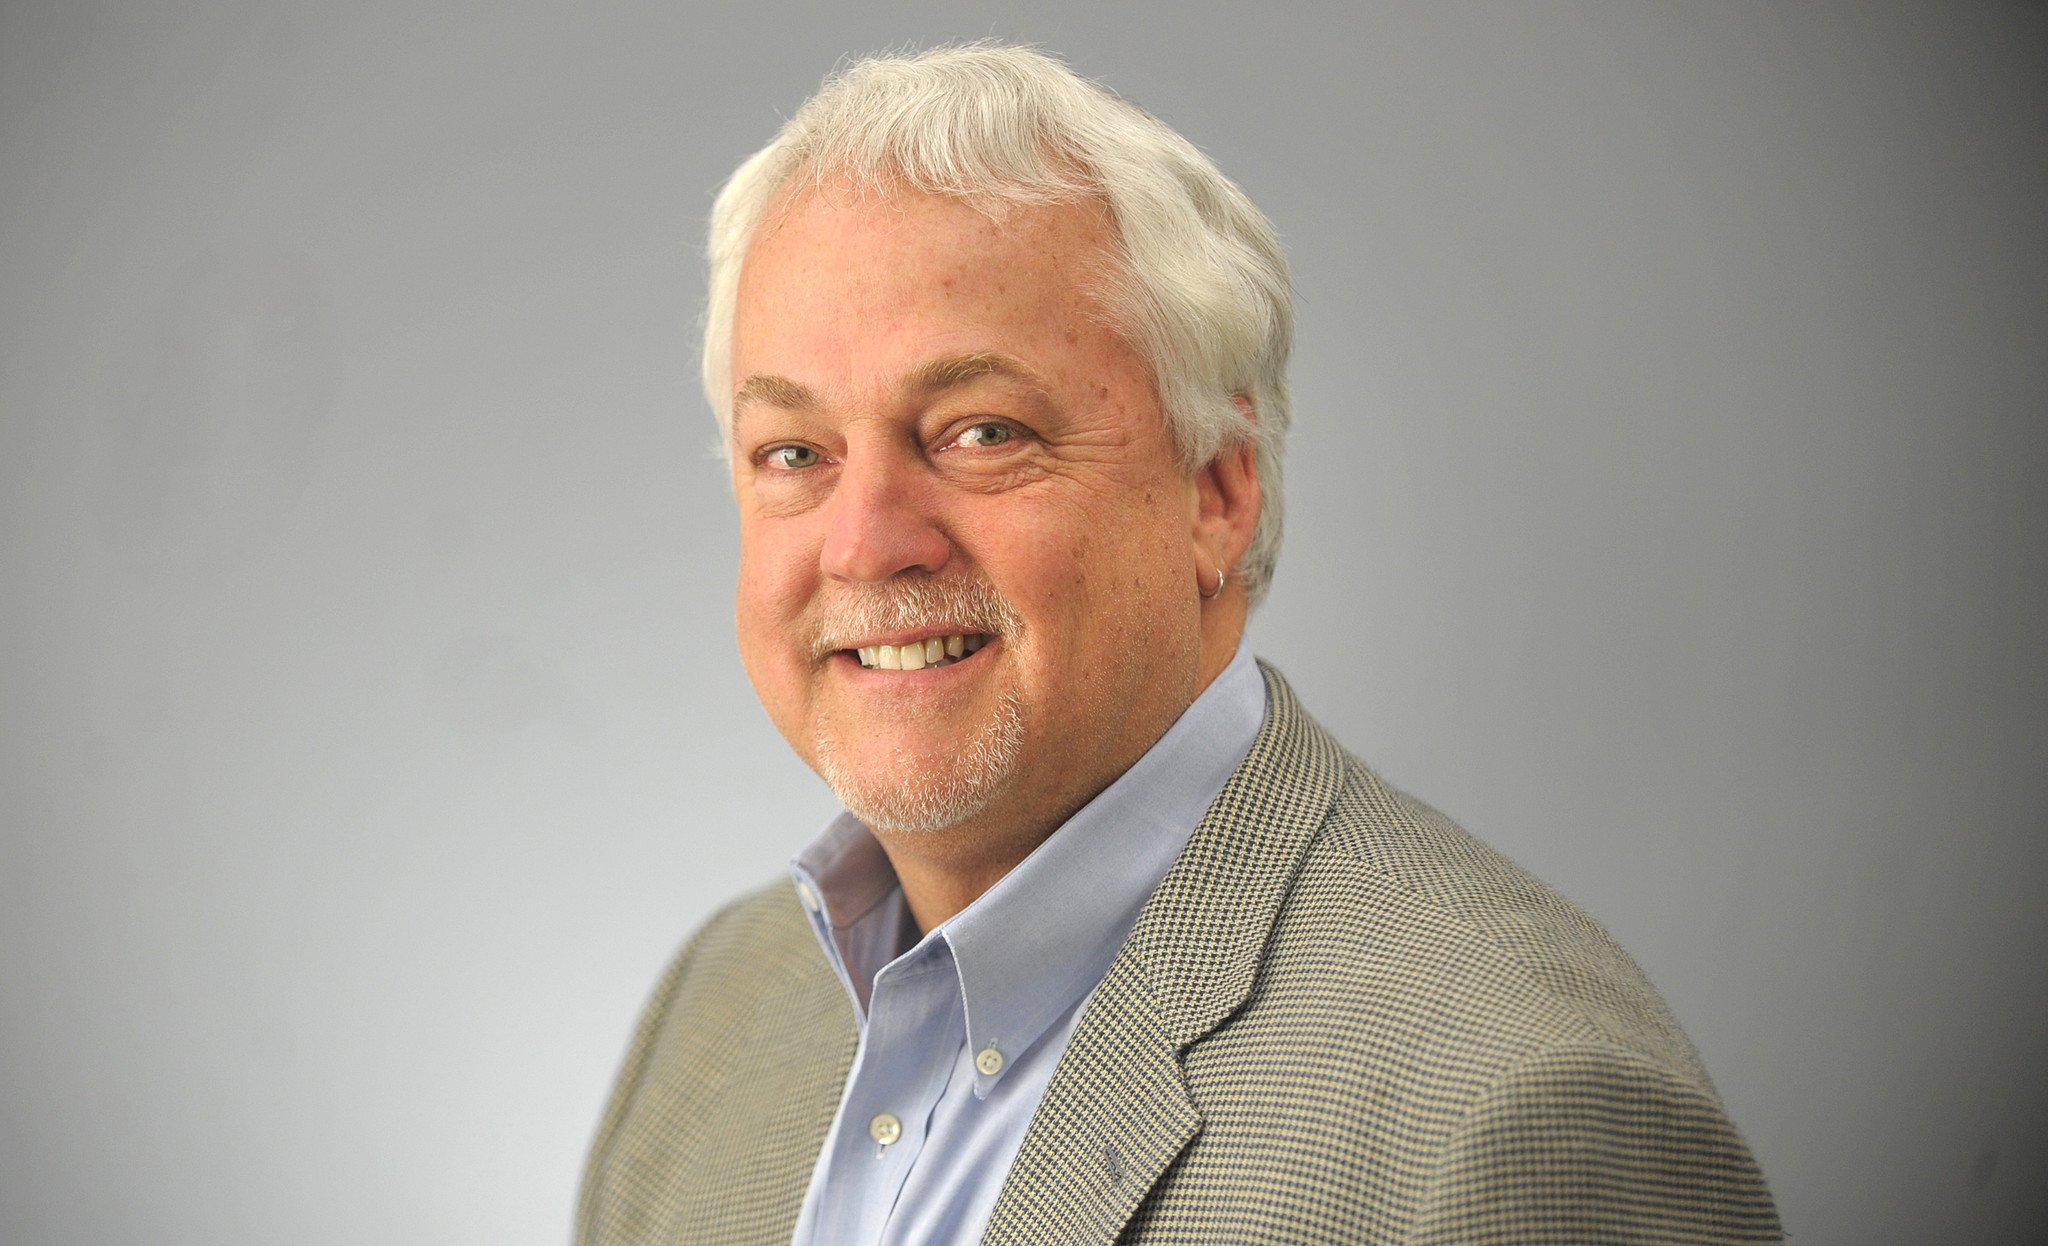 This image obtained from the Capital Gazette shows Capital Gazette Assistant Editor and Columnist Rob Hiaasen, one of the victims of the June 28, 2018, shooting at the newspaper in Annapolis, Maryland. (Handout/Capital Gazette/AFP/Getty Images)